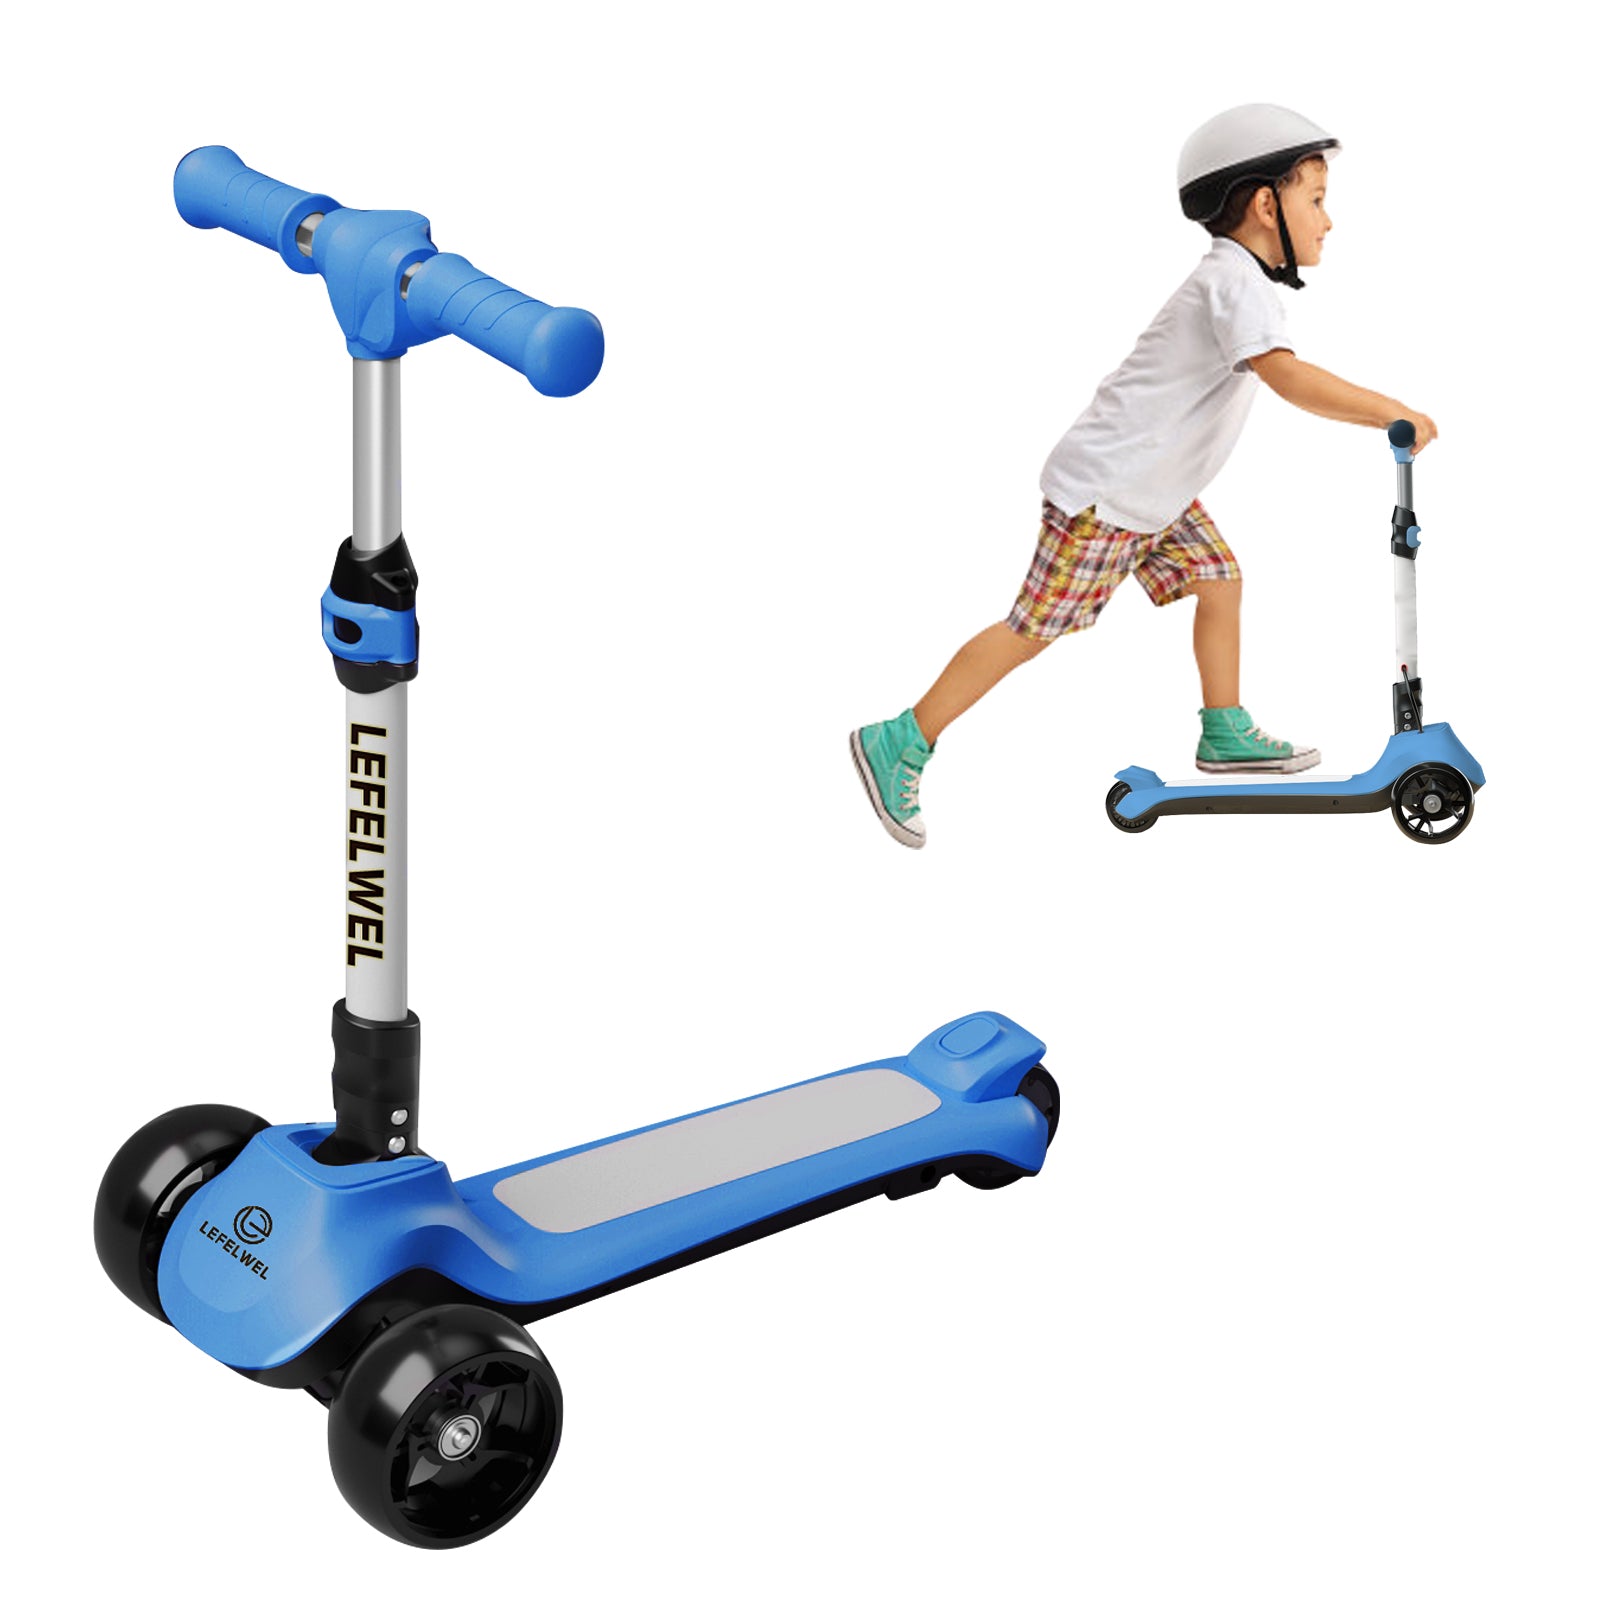 LEFELWEL® Electric Scooter for Kids Ages 3-12 w/ LED Flashing Wheels